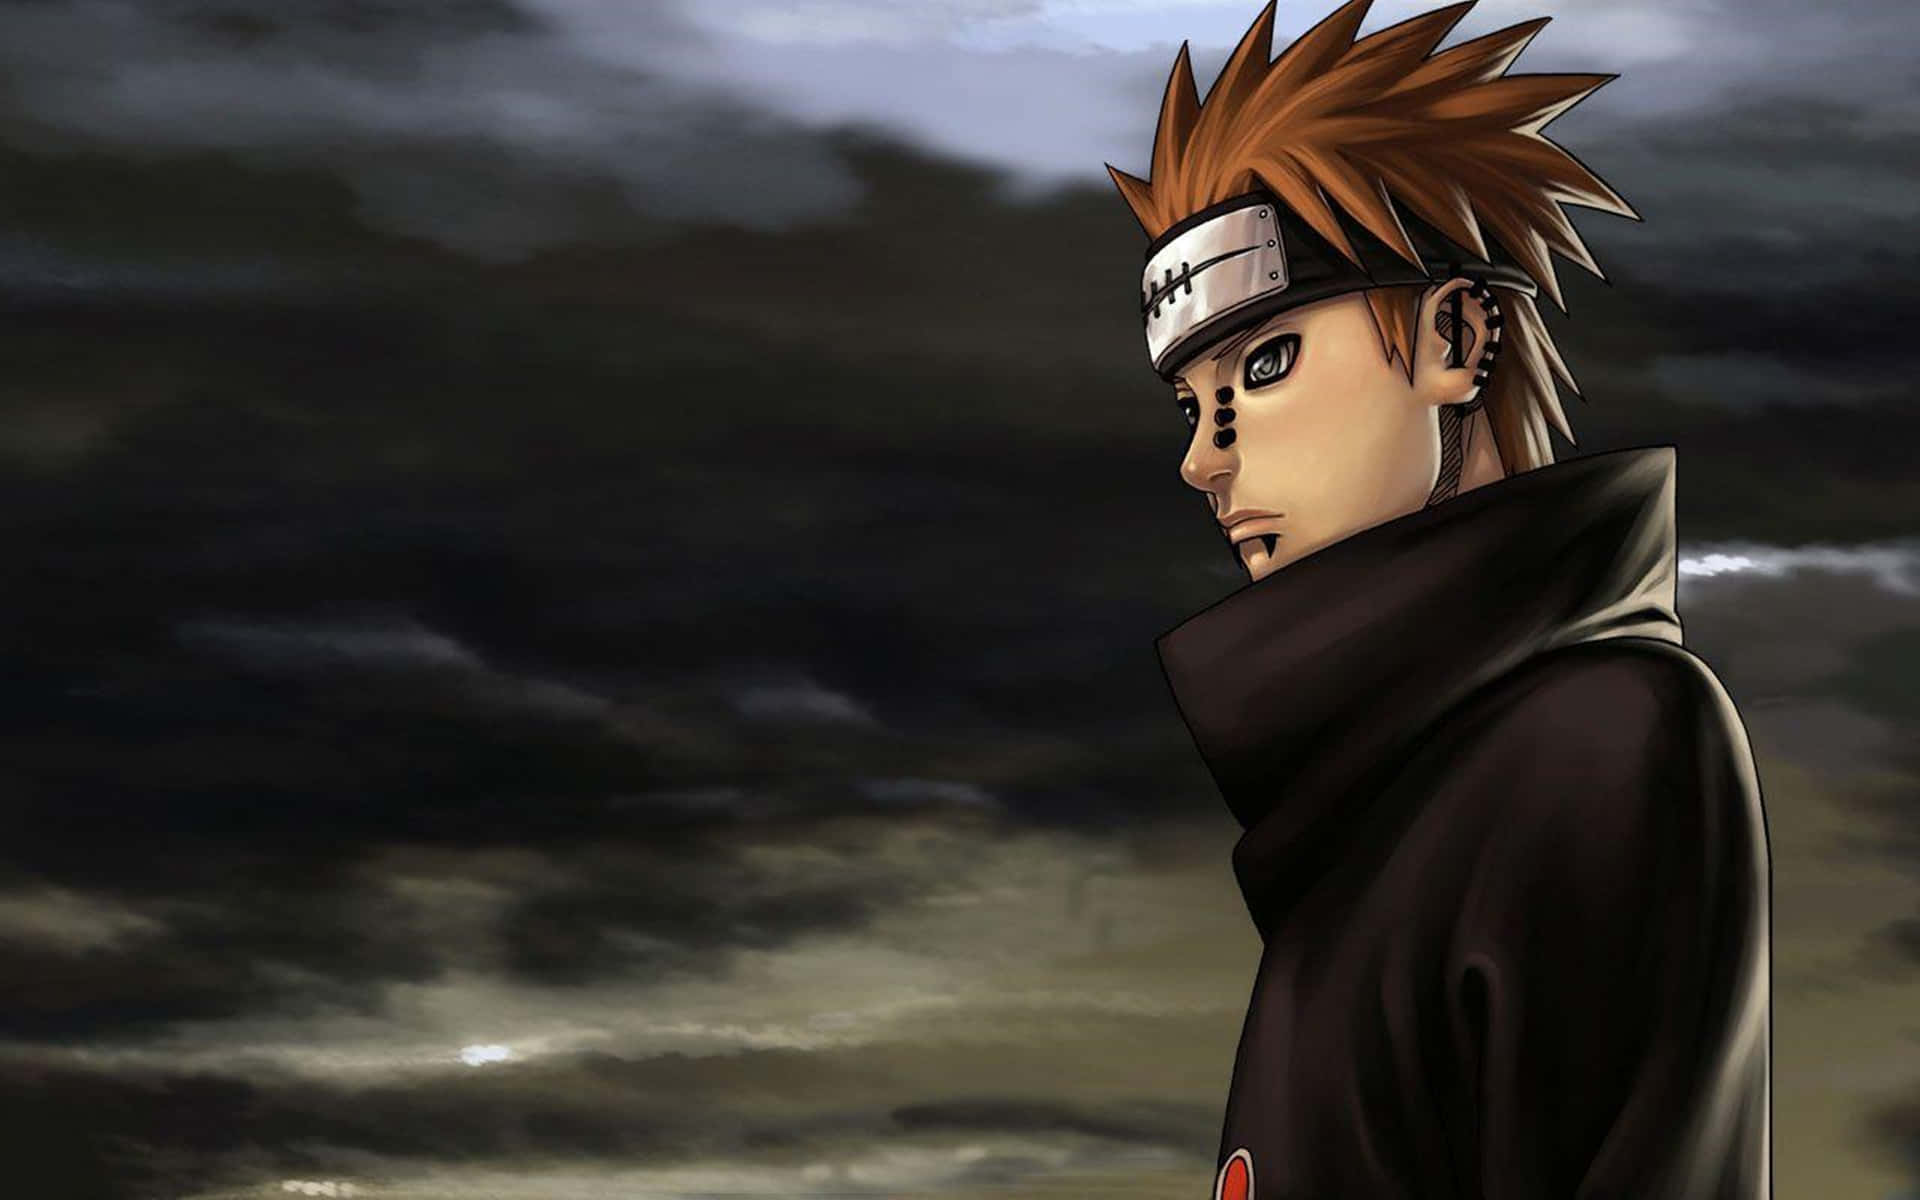 Naruto confronts Pain in a dramatic moment of determination. Wallpaper